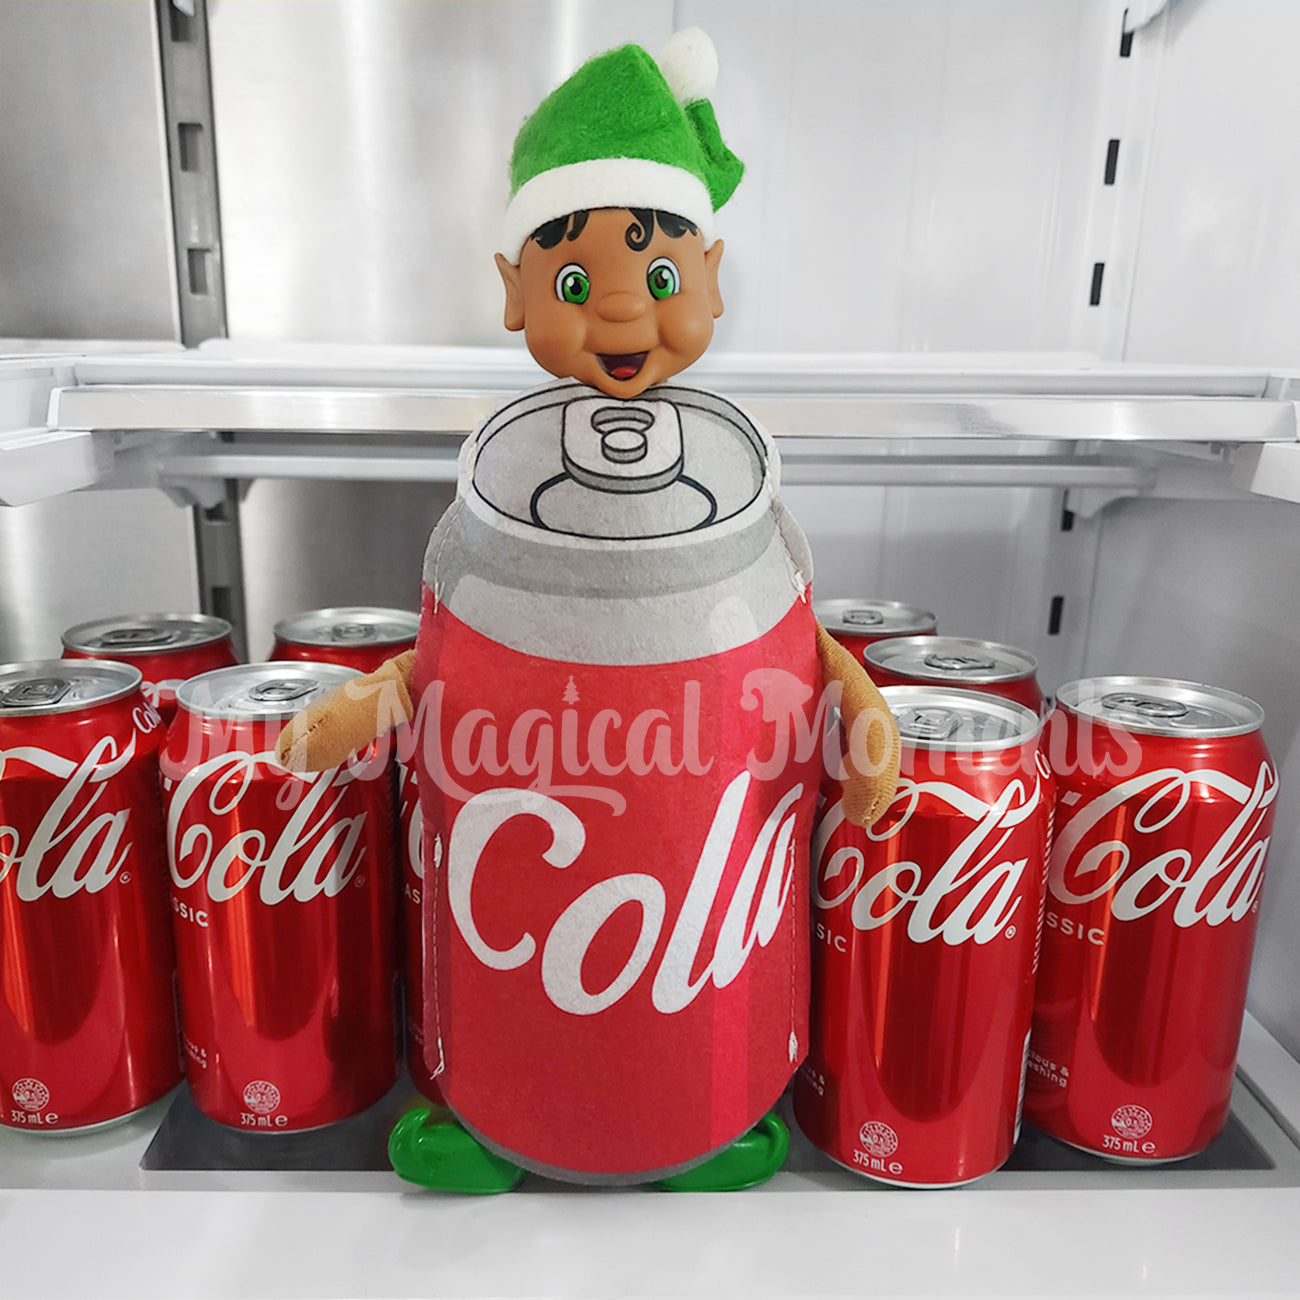 Elf wearing a cola can costume in the fridge